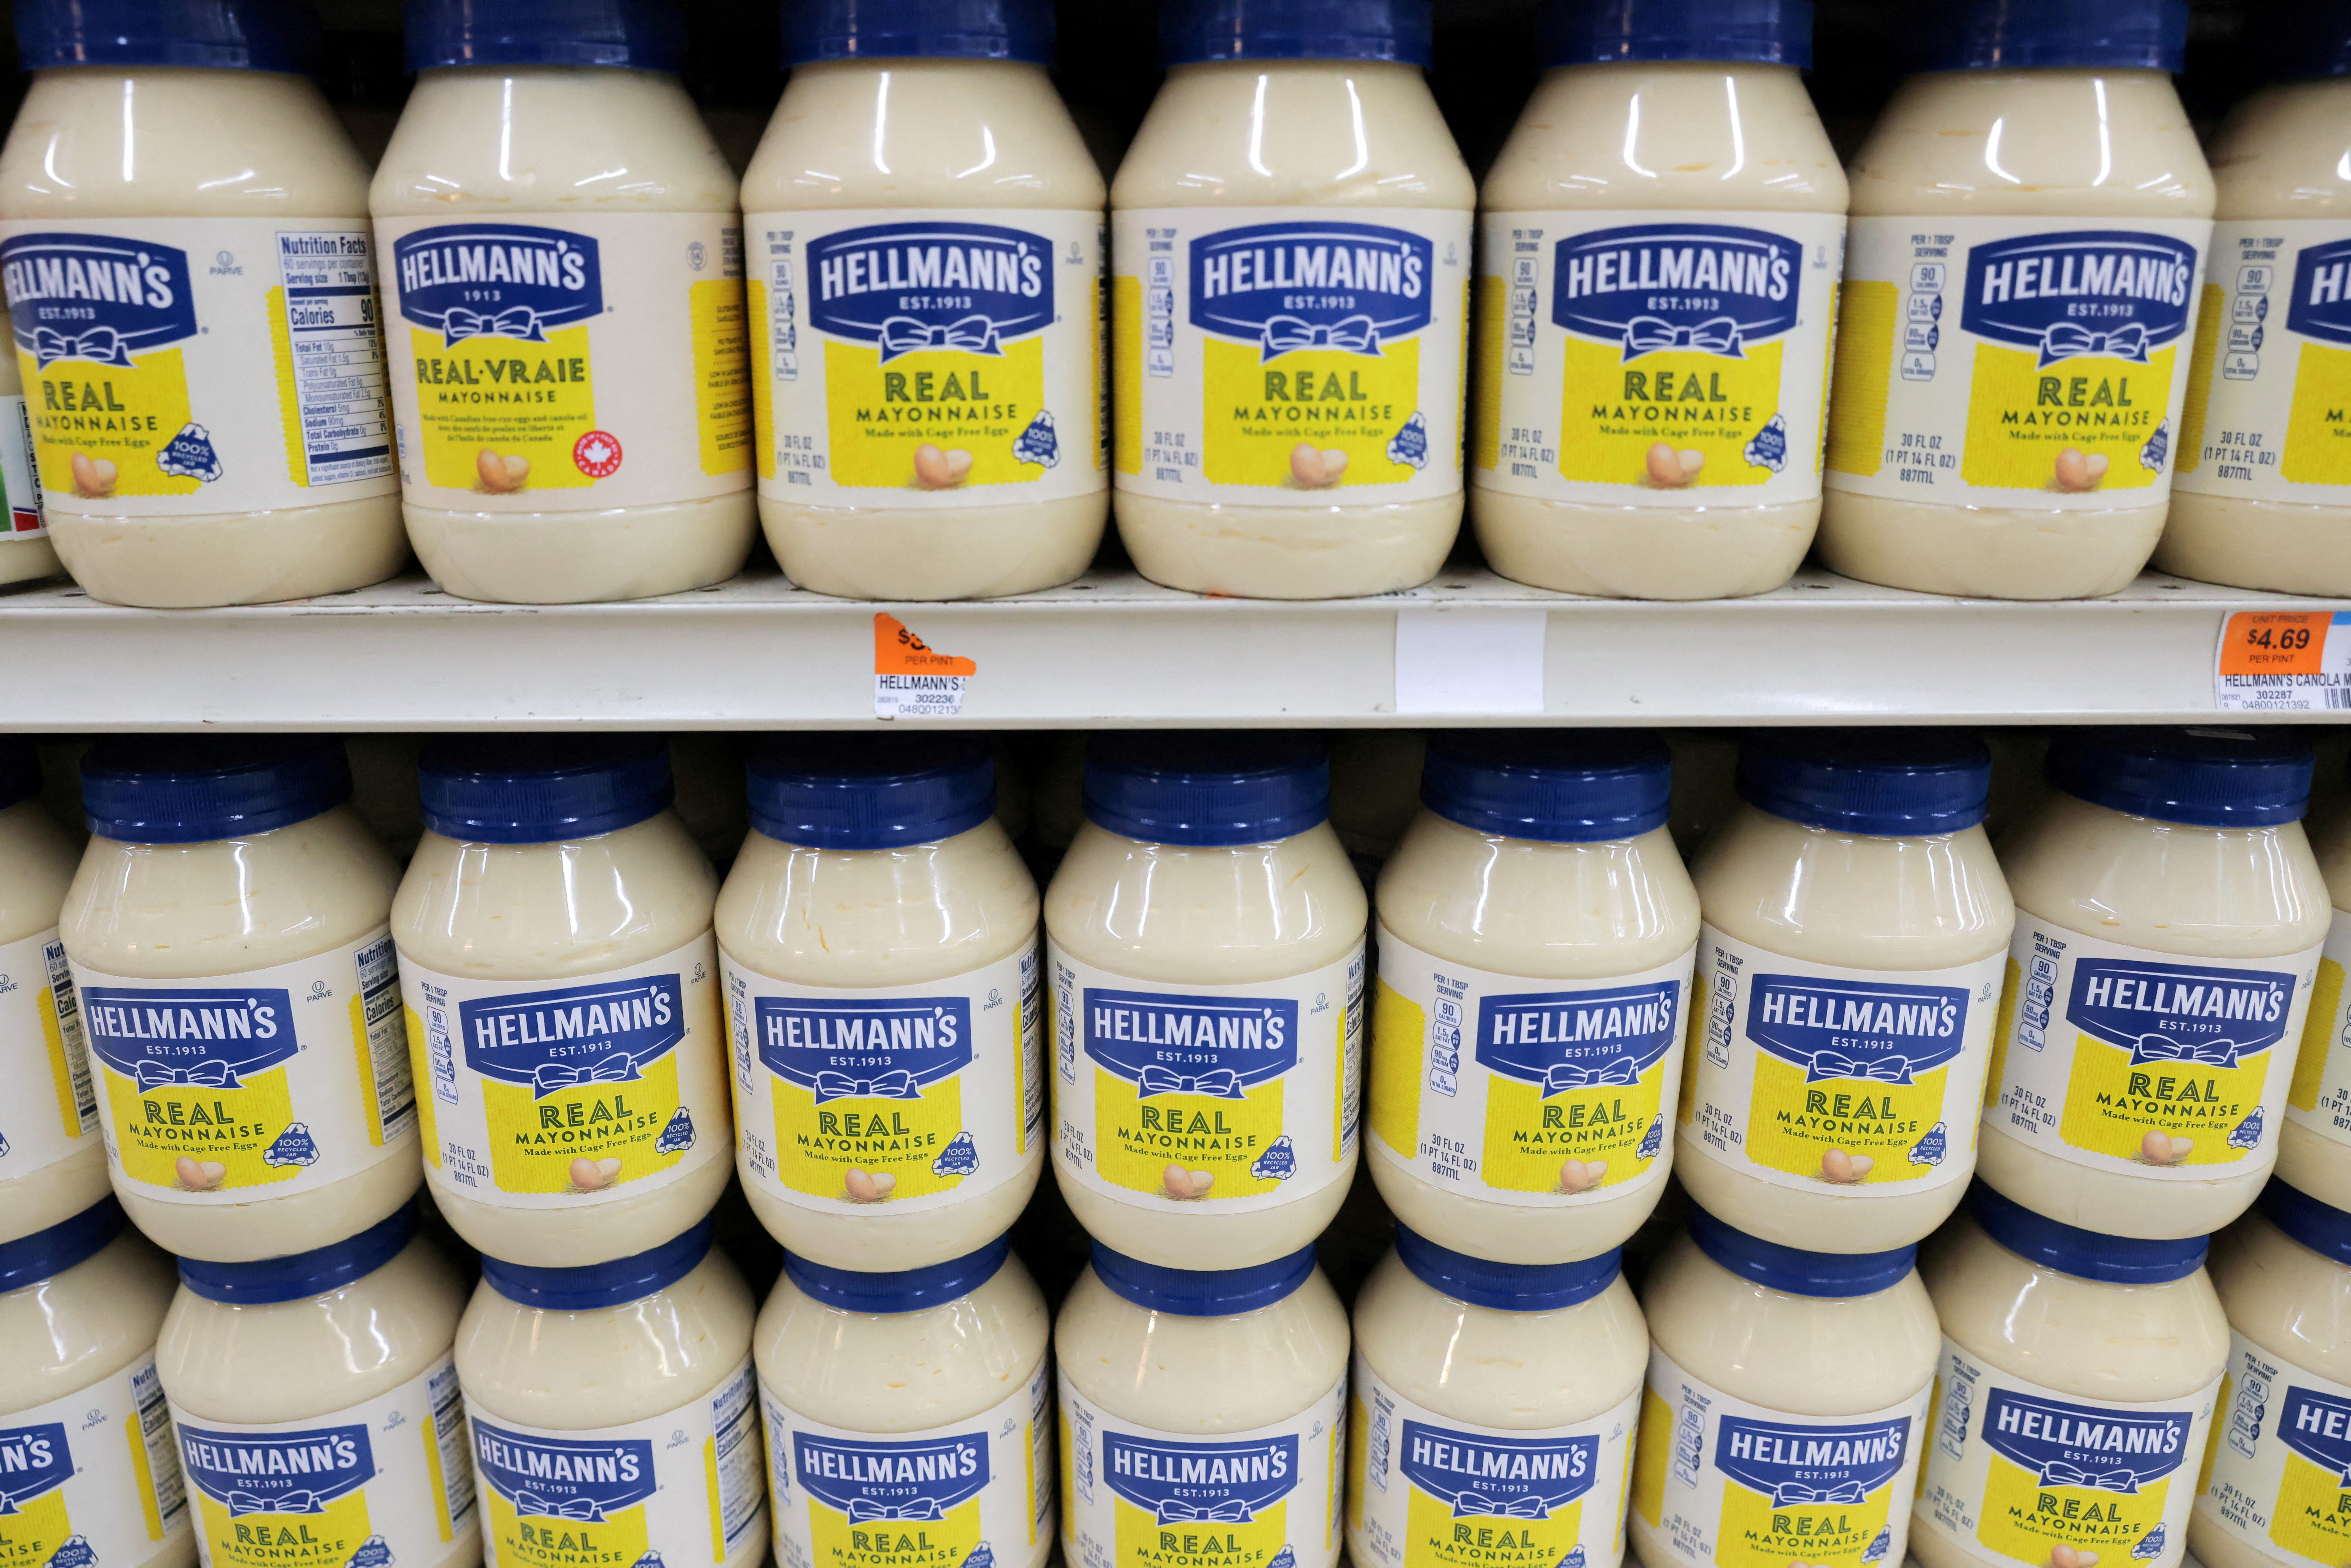 Hellmann's, a brand of Unilever, is seen on display in a store in Manhattan, New York City